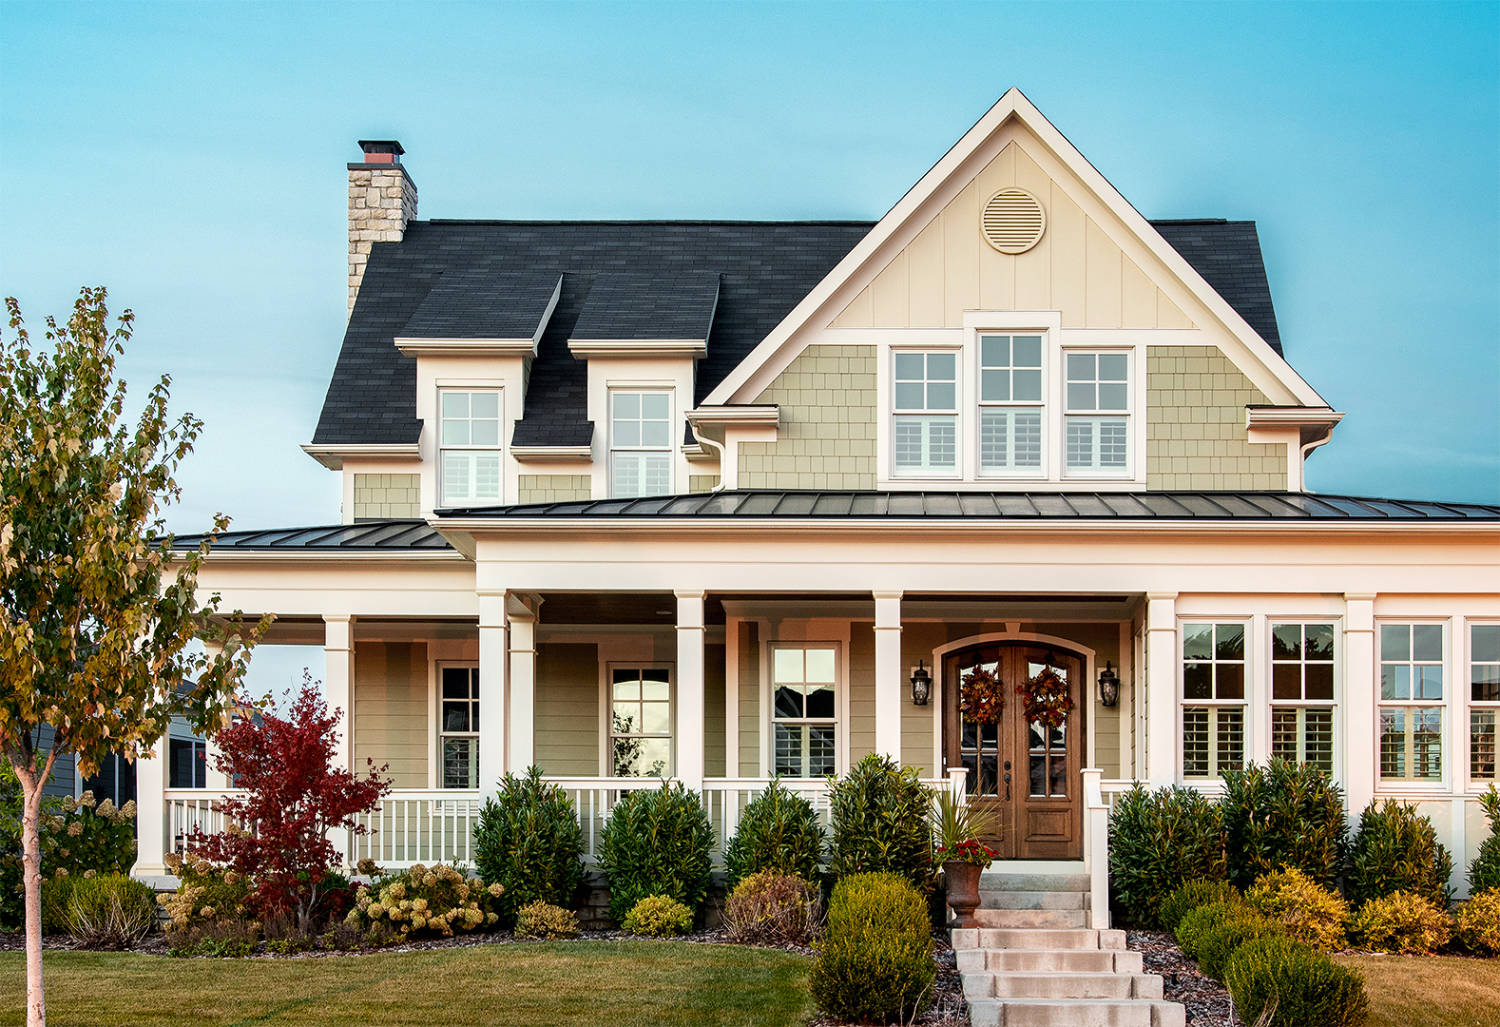 Add Value to Your Home with Beautiful, Long-Lasting Siding from New Image Siding hero image